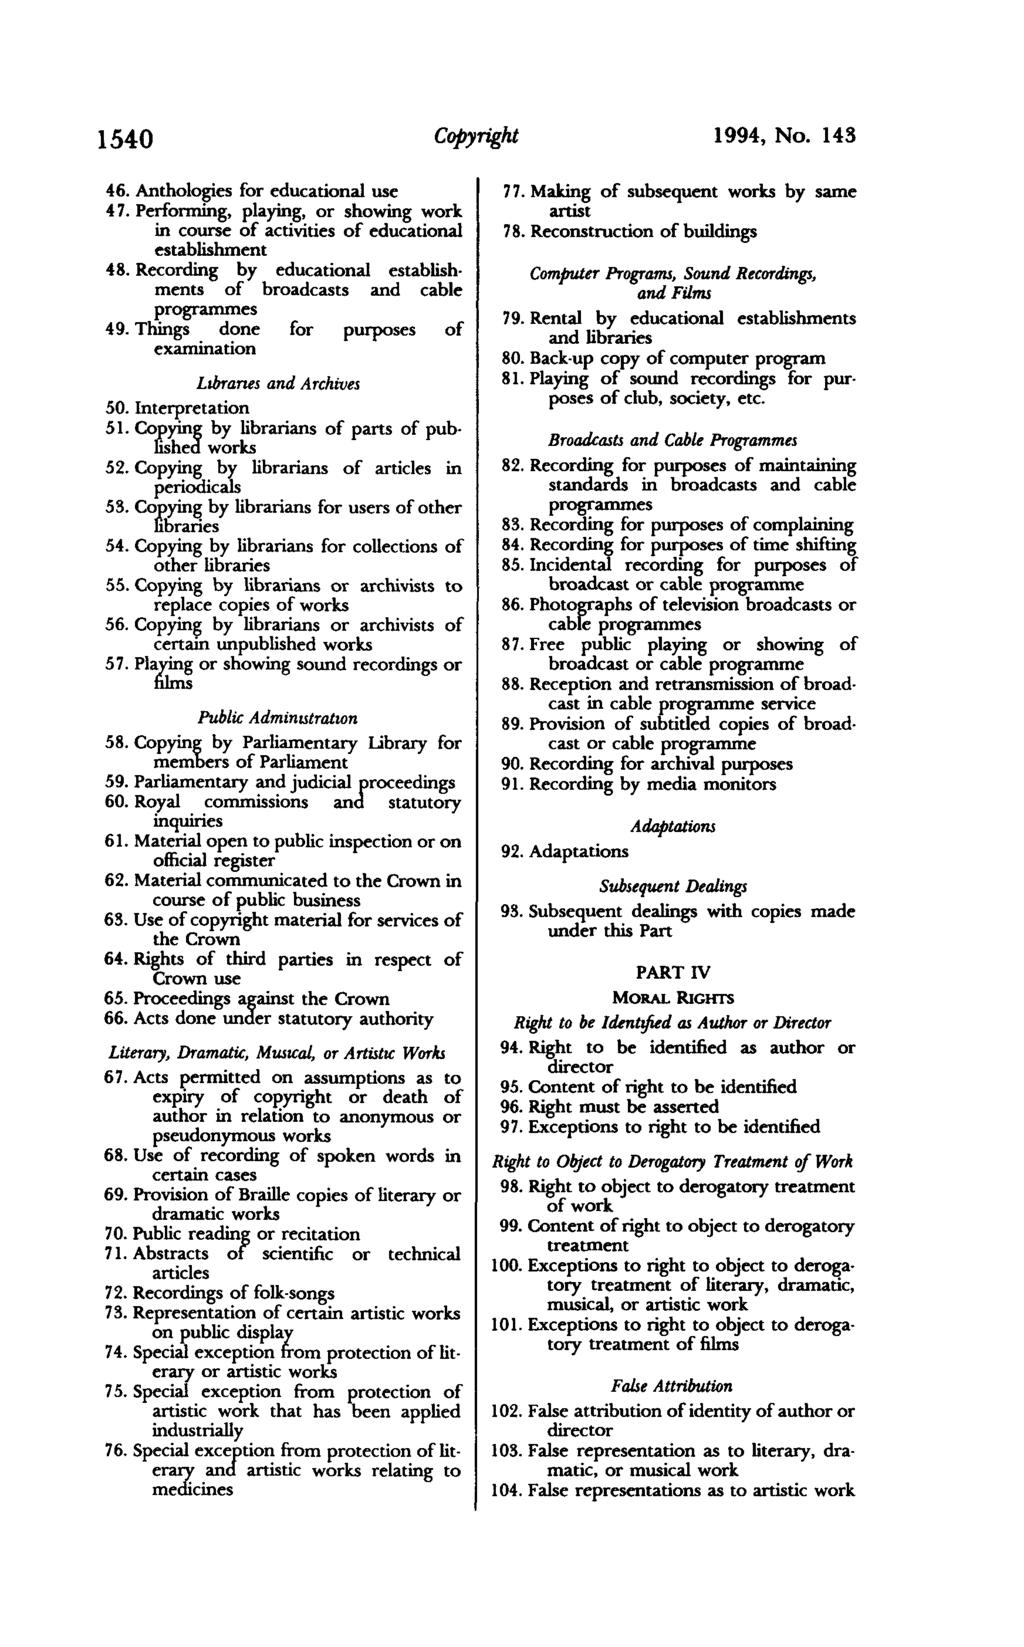 1540 Copyright 1994, No. 143 46. Anthologies for educational use 47. Perfonning, playing, or showing work in course of activities of educational establishment 48.